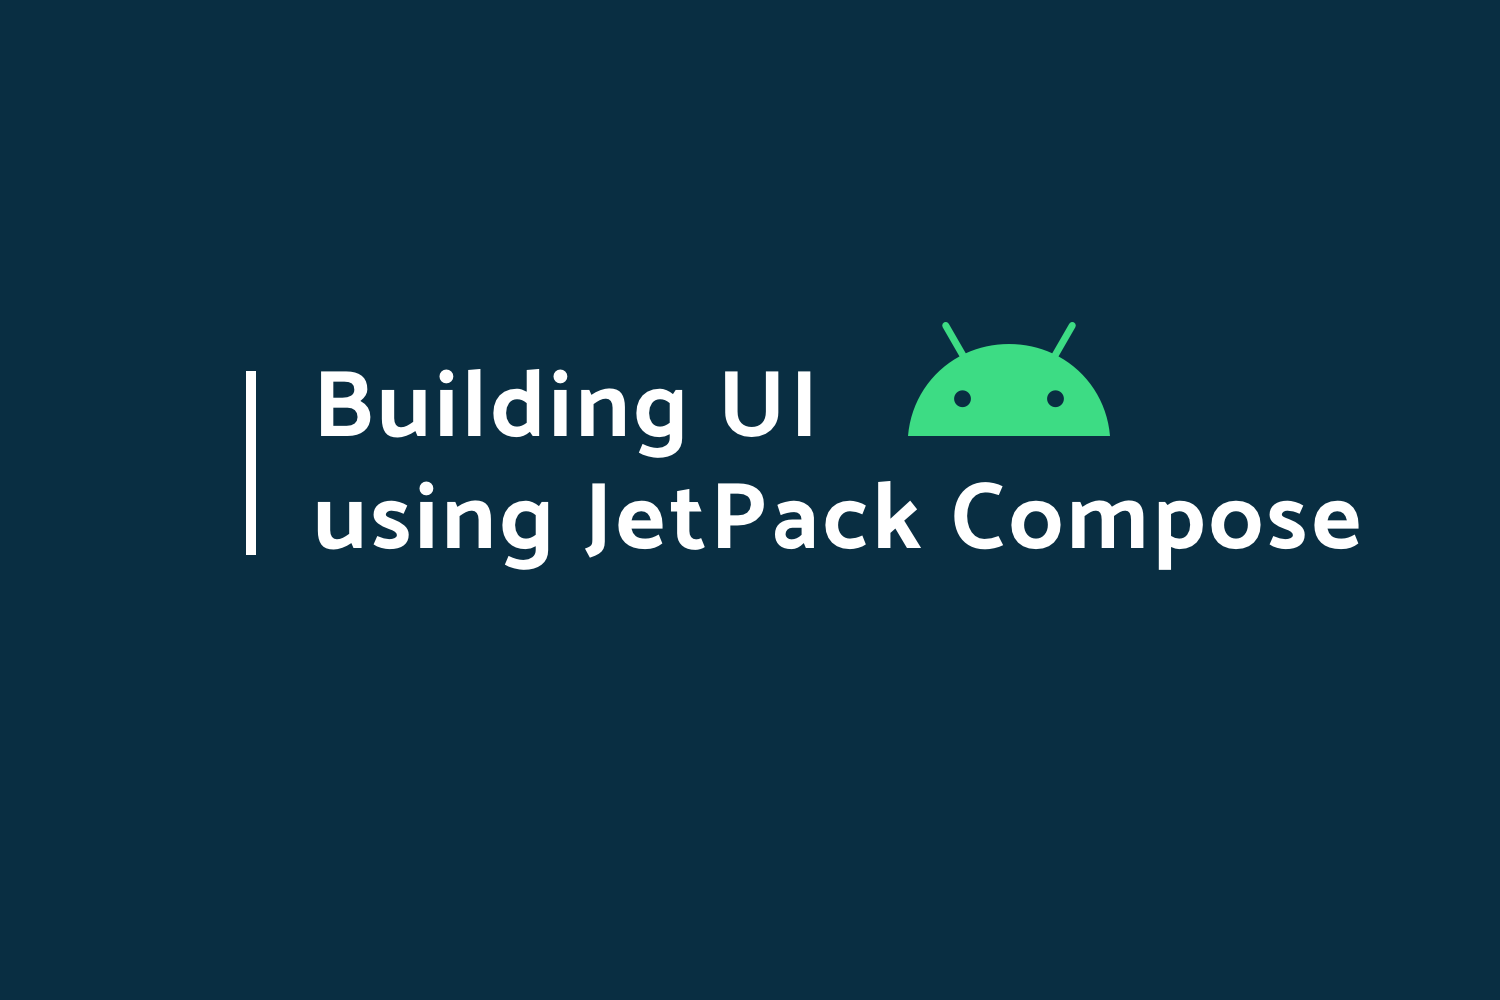 Using Jetpack Compose to build UI in Android